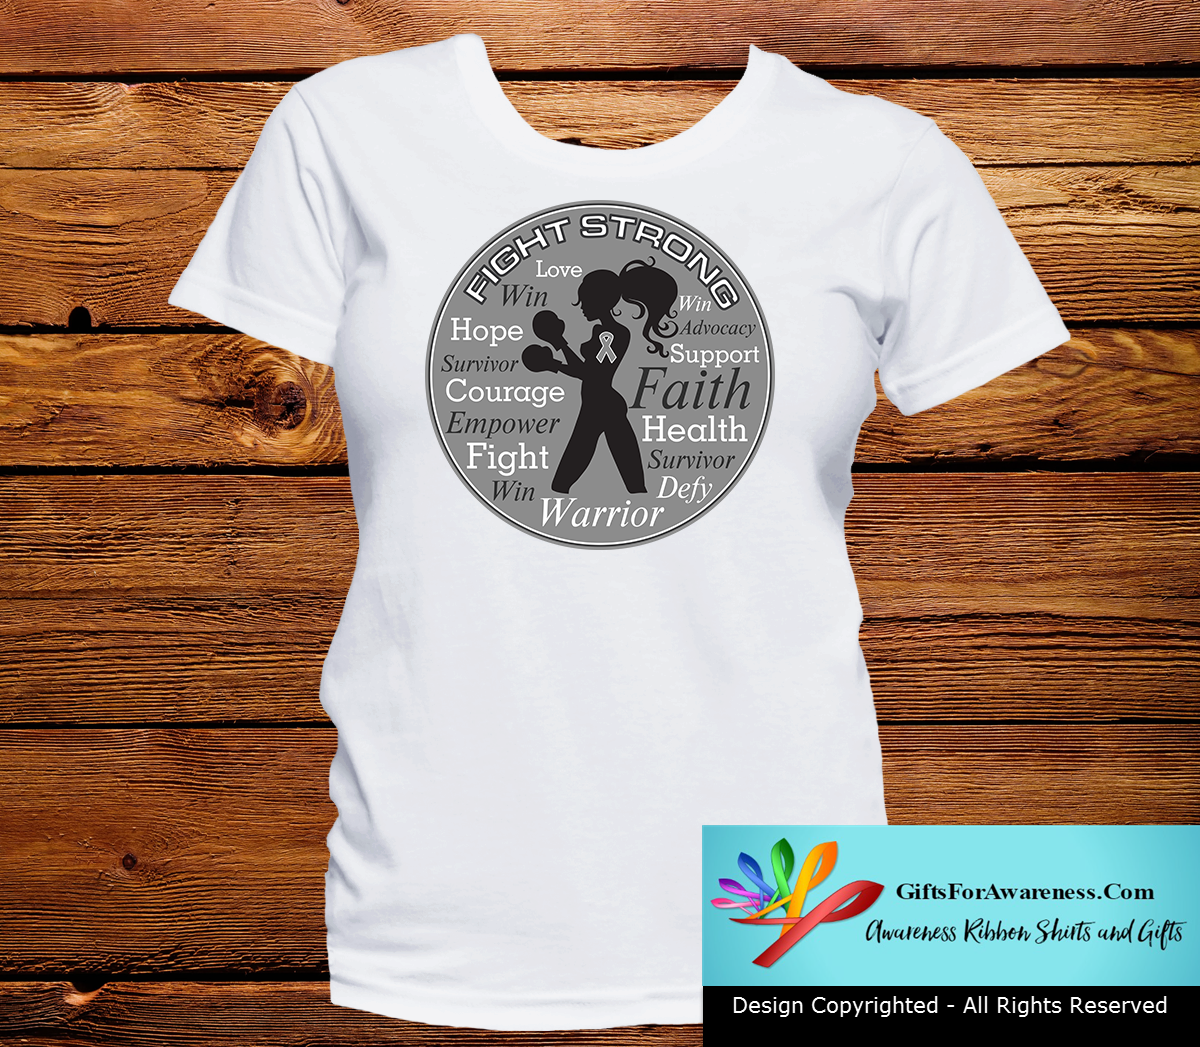 Asthma Fight Strong Motto Shirts.png Fight Strong Motto T-Shirts - GiftsForAwareness